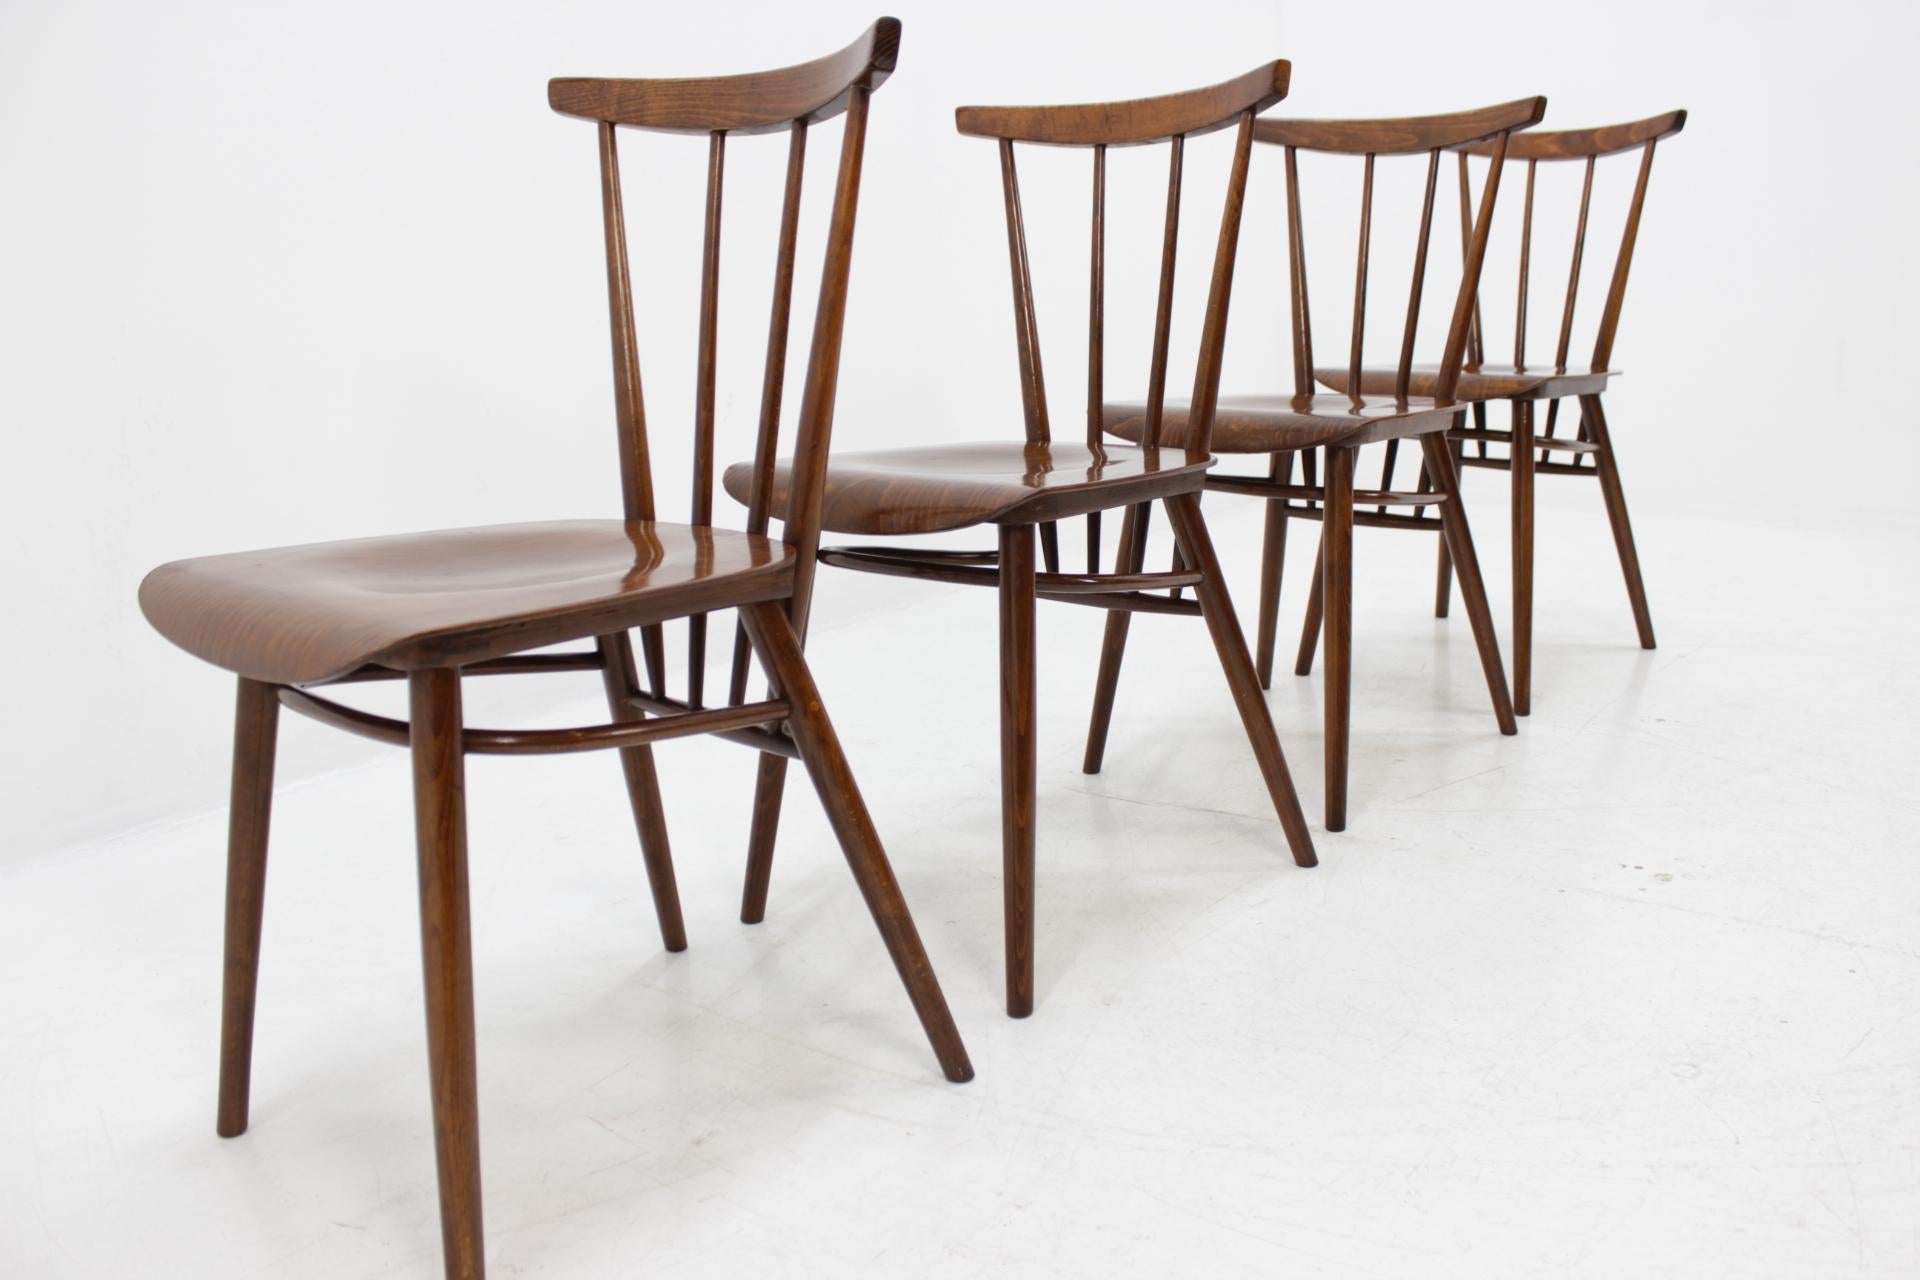 Set of Four Tatra Dining Chairs, Czechoslovakia, 1960 In Good Condition For Sale In Praha, CZ